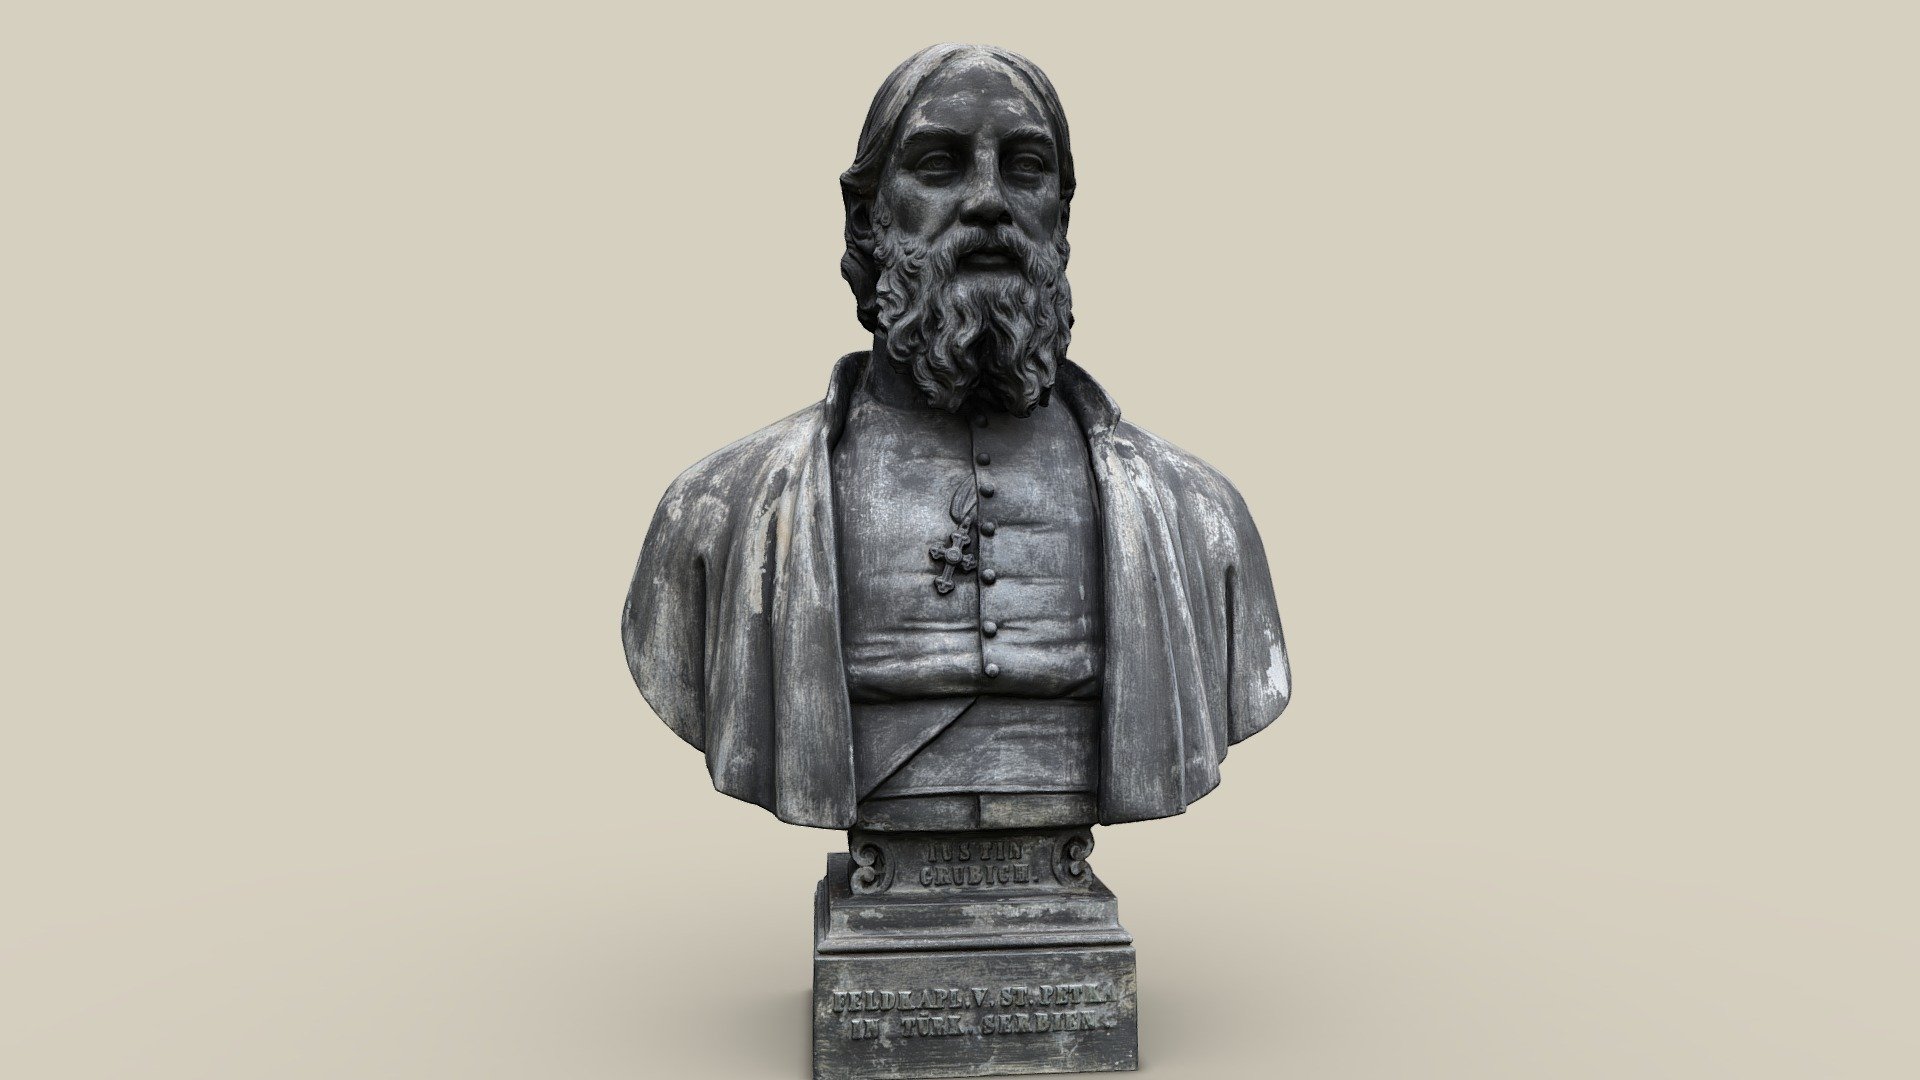 Bust of the field chaplain of St. Petka Justin Grubich in the Heldenberg memorial. Grubich represents a personality of the Hungarian campaign in 1848 and 1849. The revolution that broke out in Hungary on 15 March 1848 developed from October 1848 into Hungary's war of independence against the domination of the Austrian Habsburgs 3d model